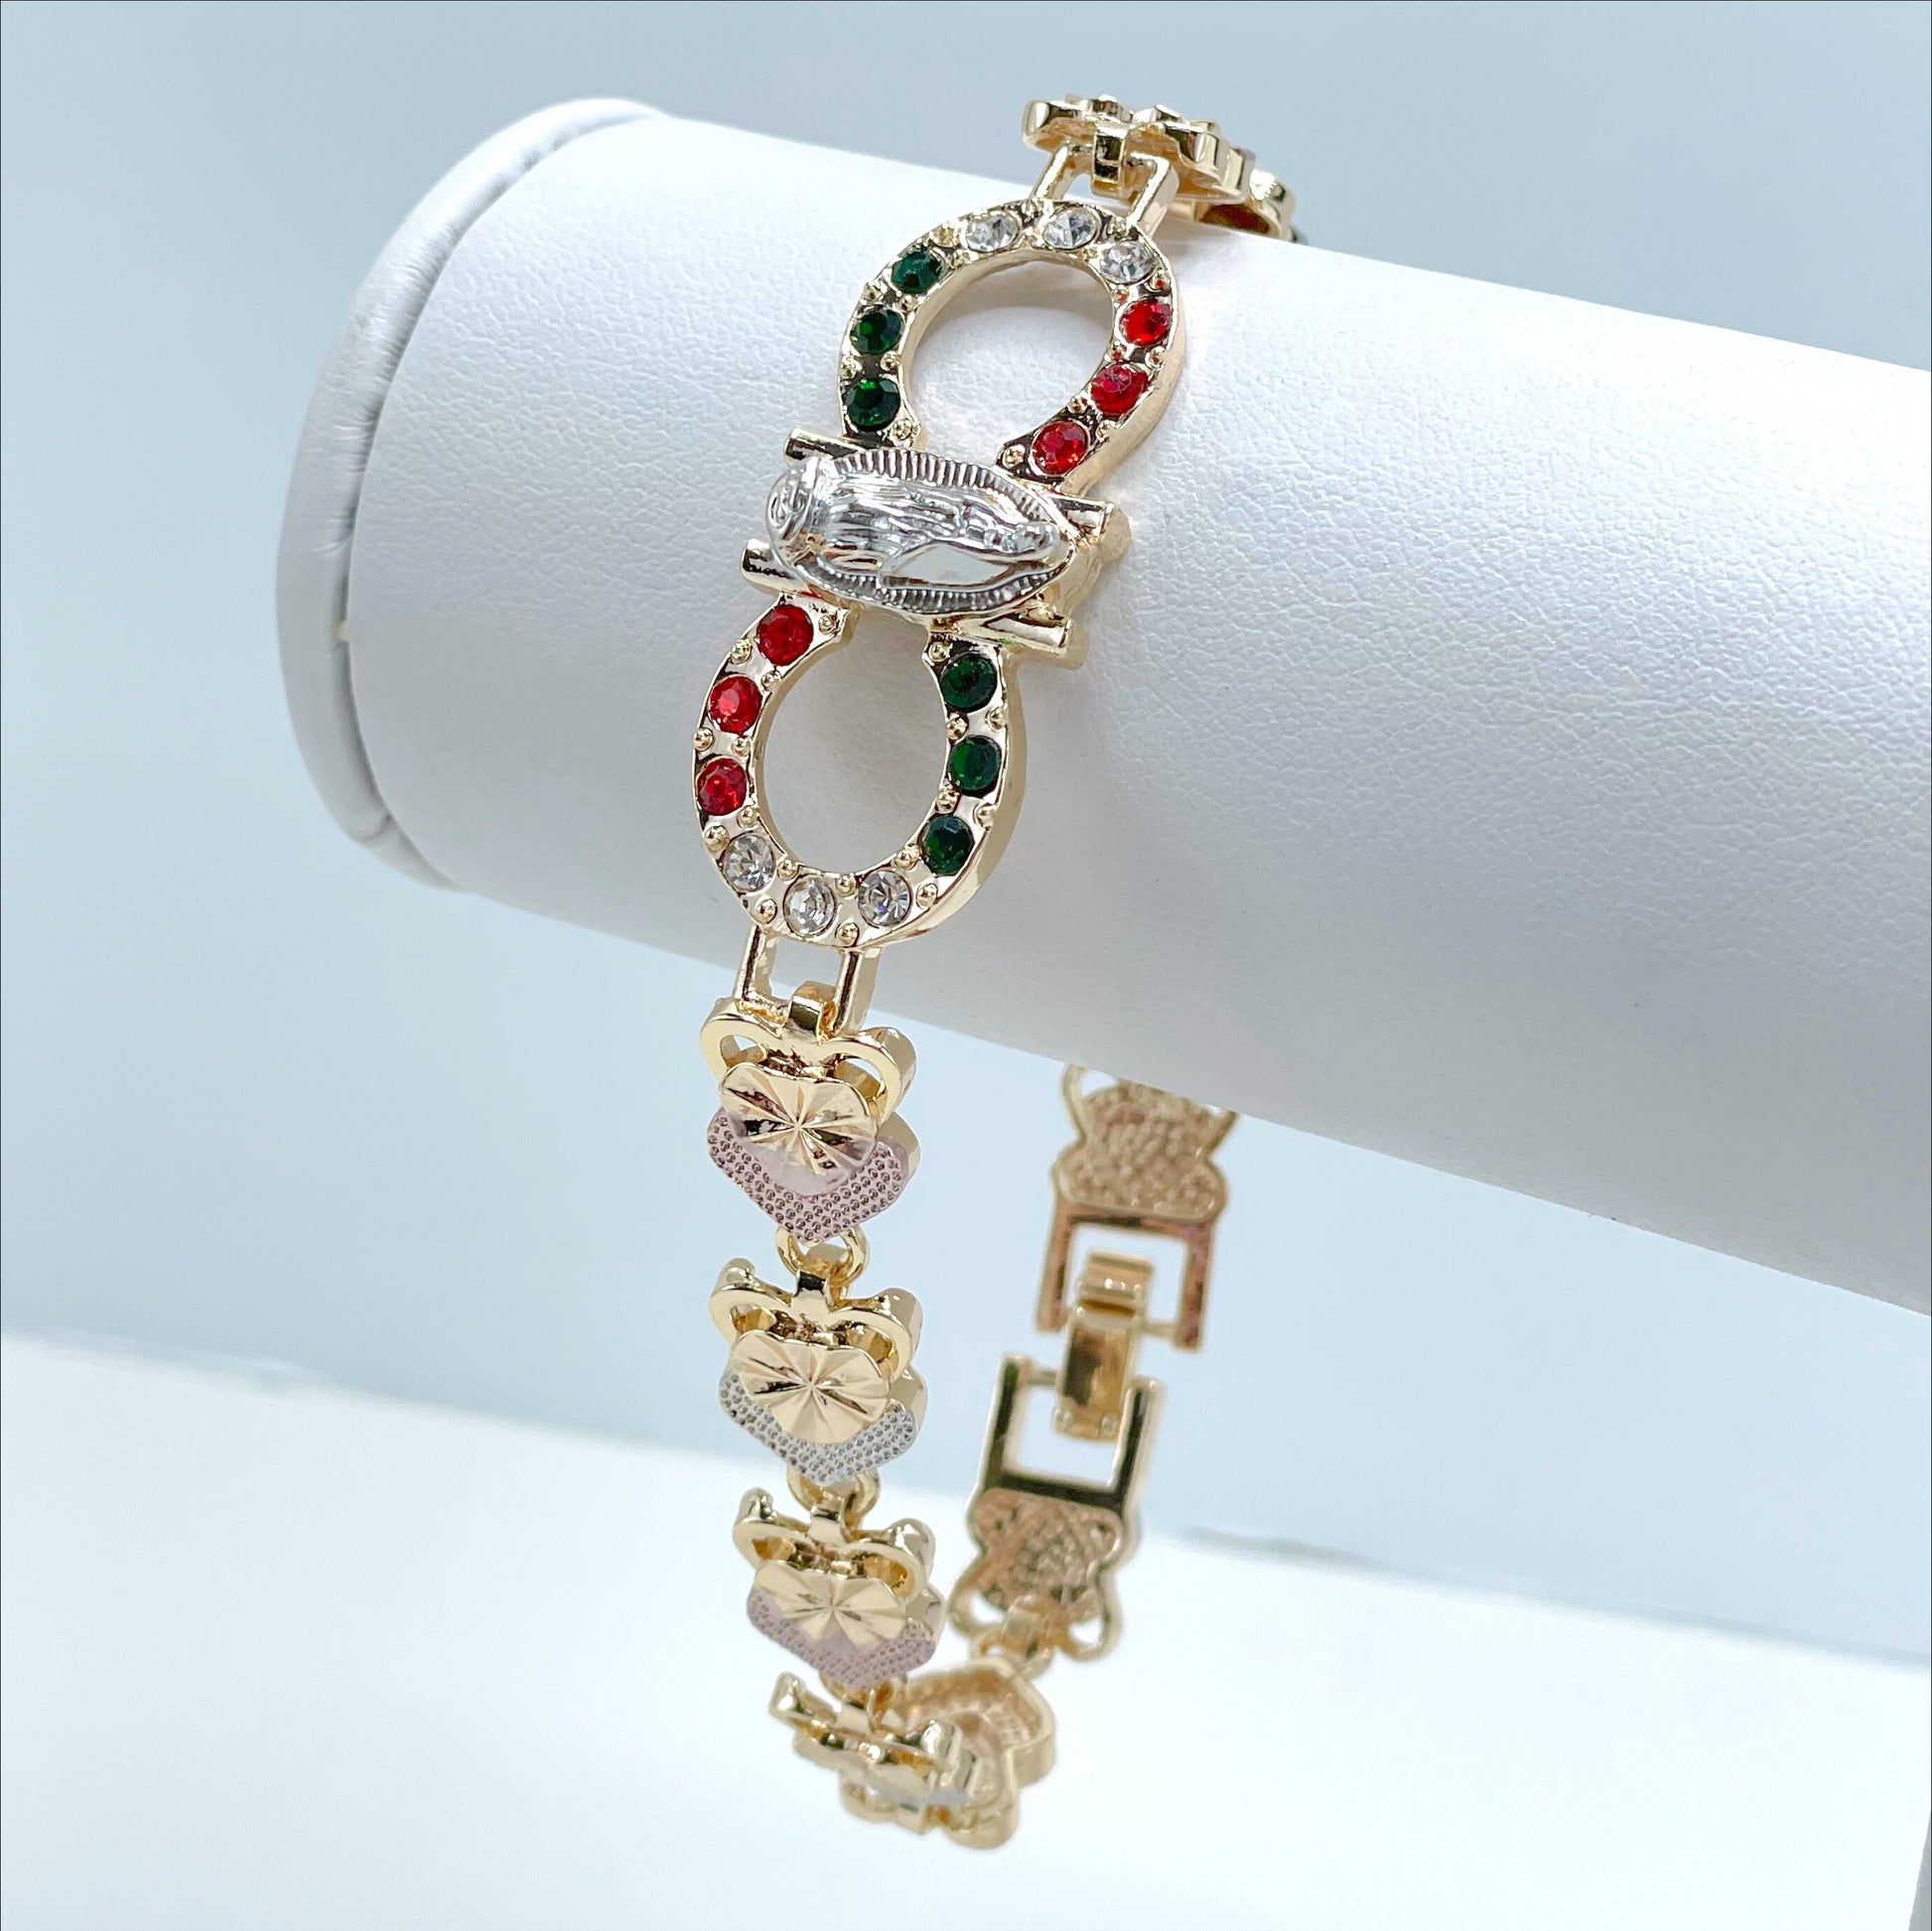 18k Gold Filled Three Tone Rose Hearts, Red, White and Green Zirconia, Guadalupe Virgin Bracelet, Wholesale and Jewelry Supplies